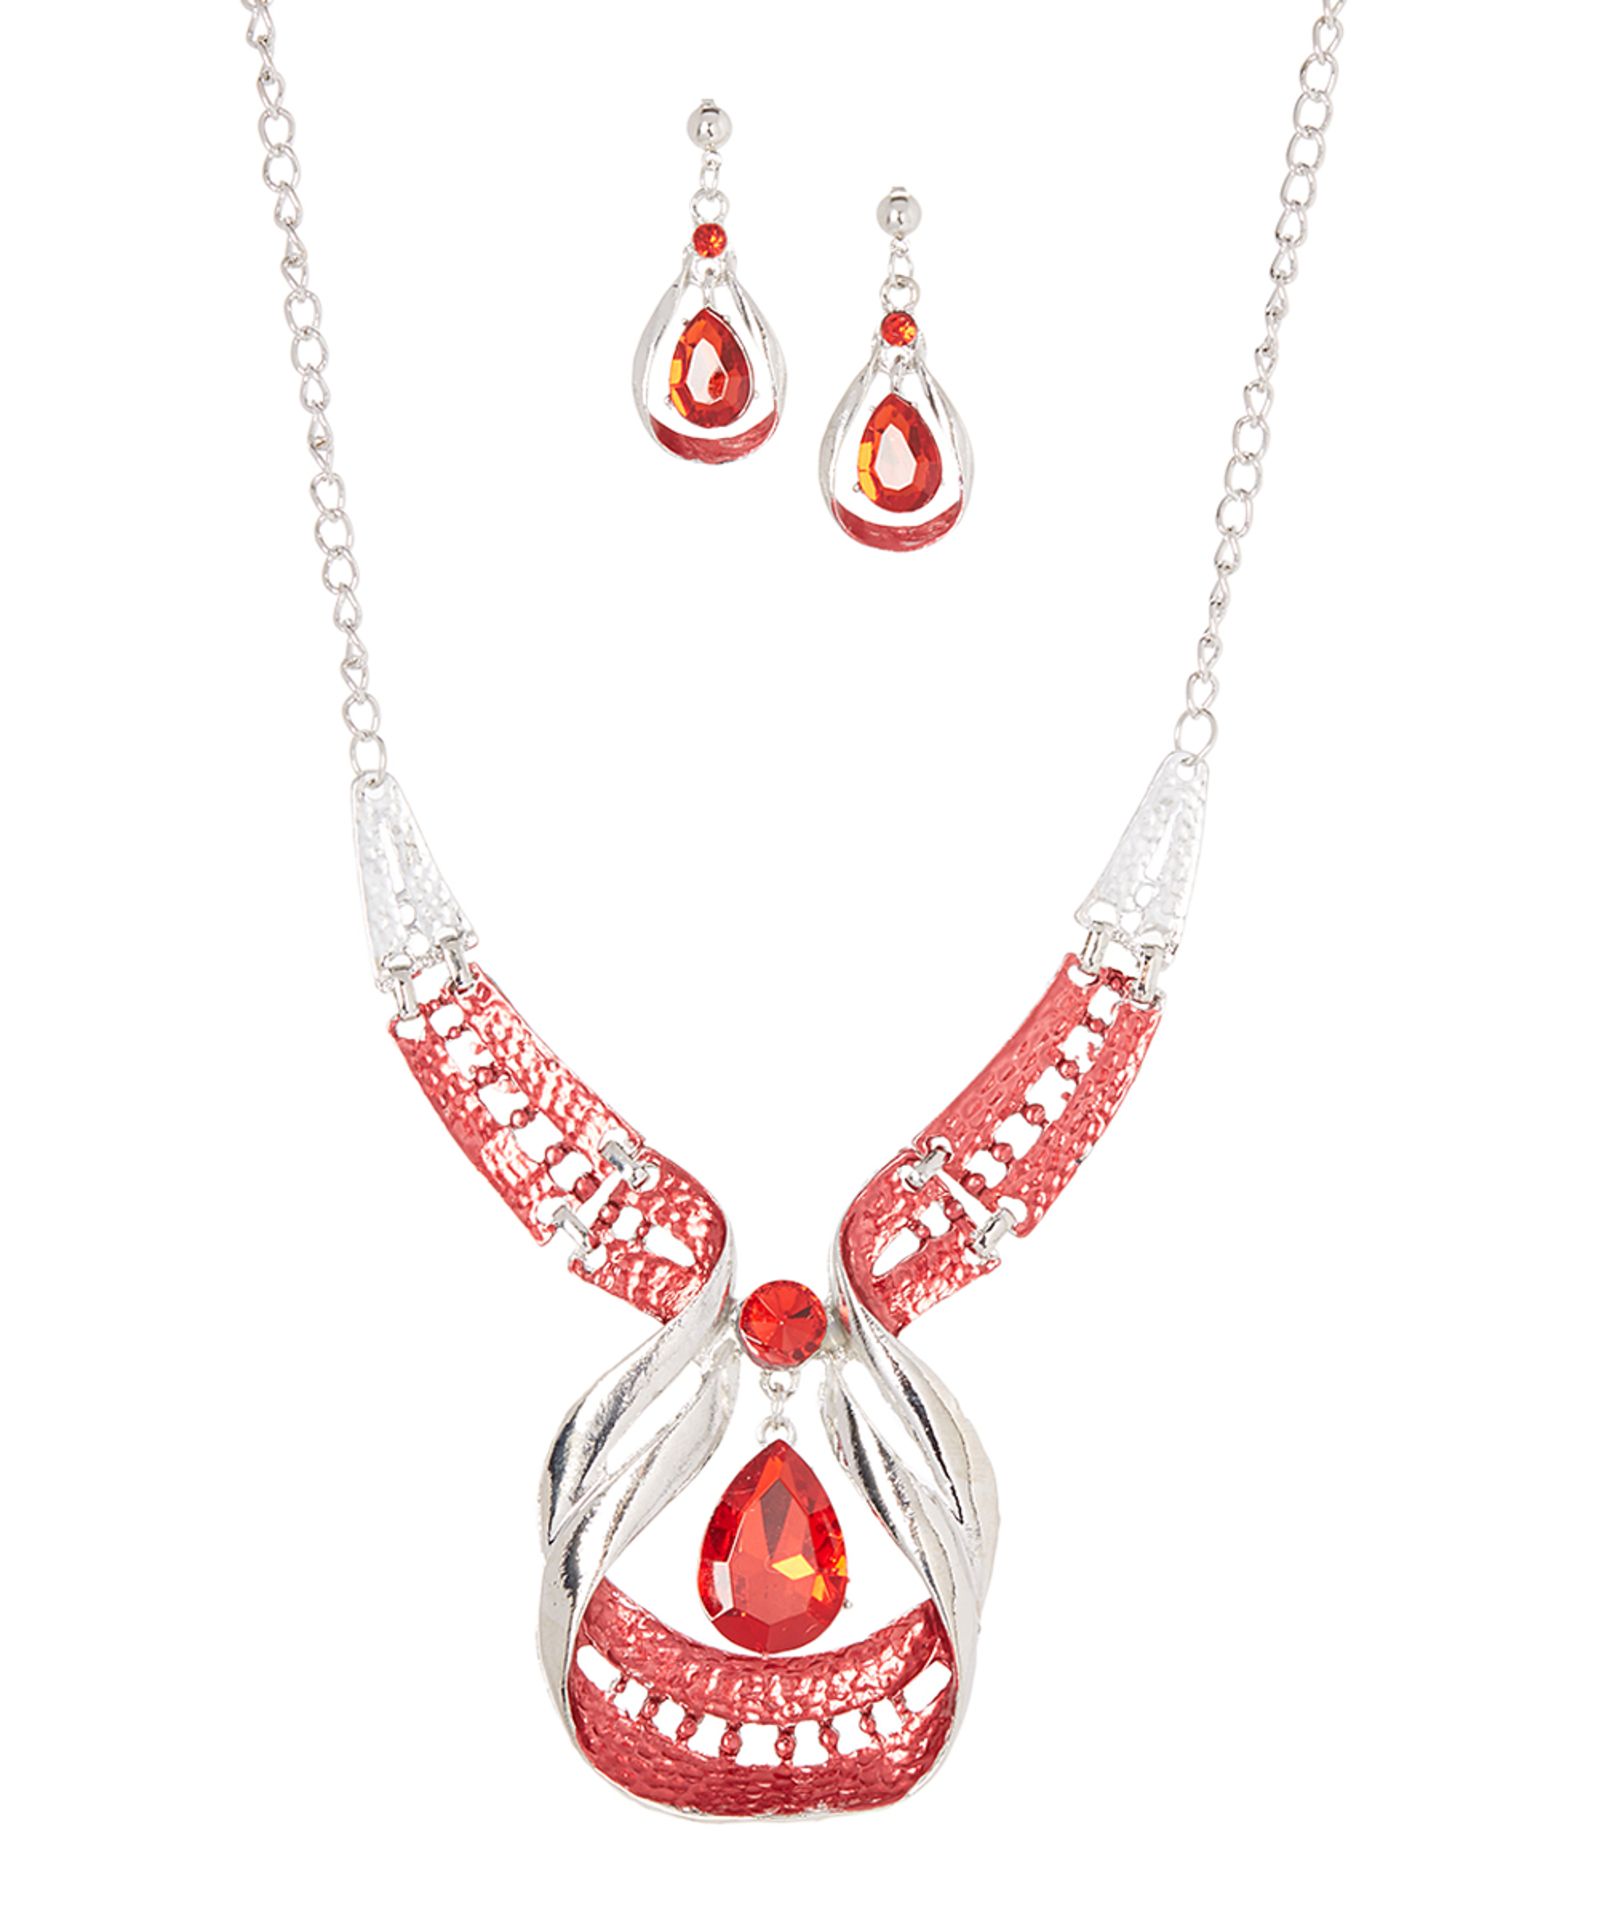 Novadab Red Crystal Wave Droplet Statement Necklace & Teardrop Earrings (Size: One Size ) [Ref: